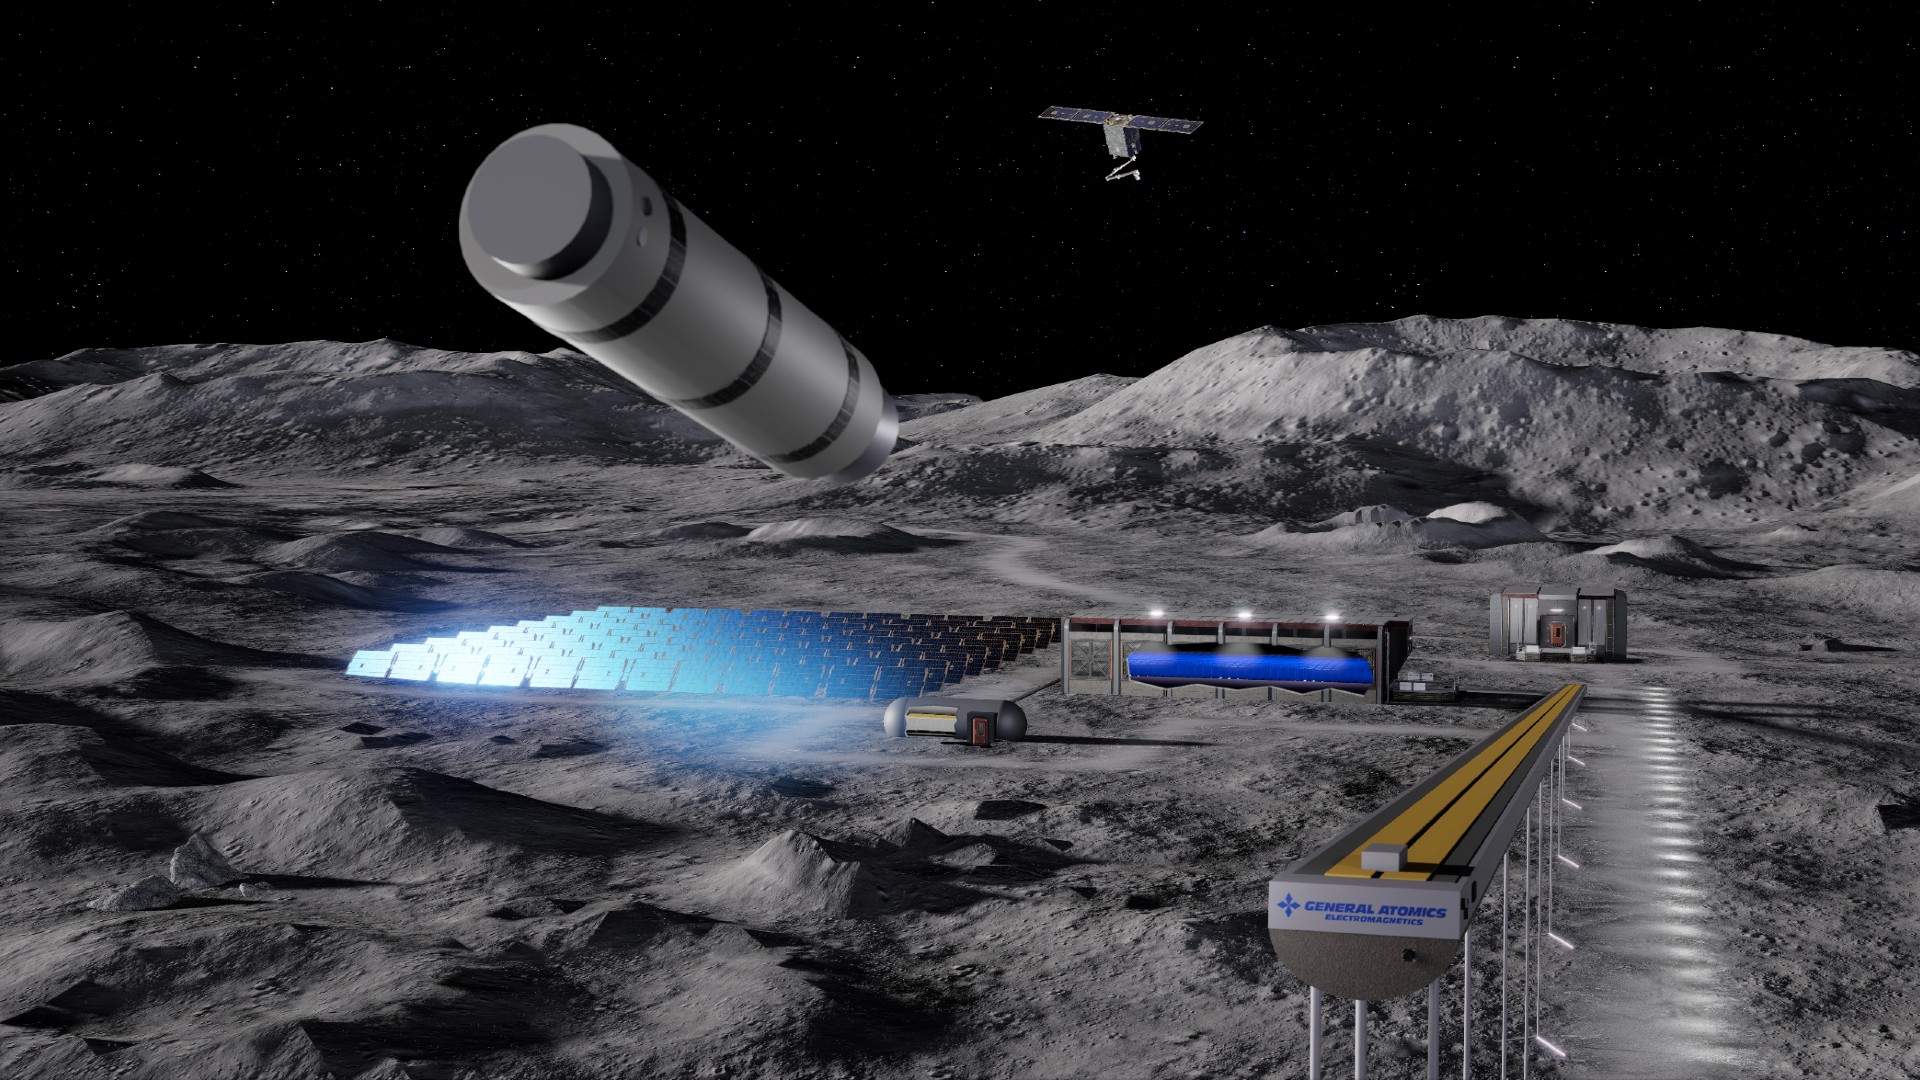  Could we launch resources from the moon with electromagnetic railguns? 